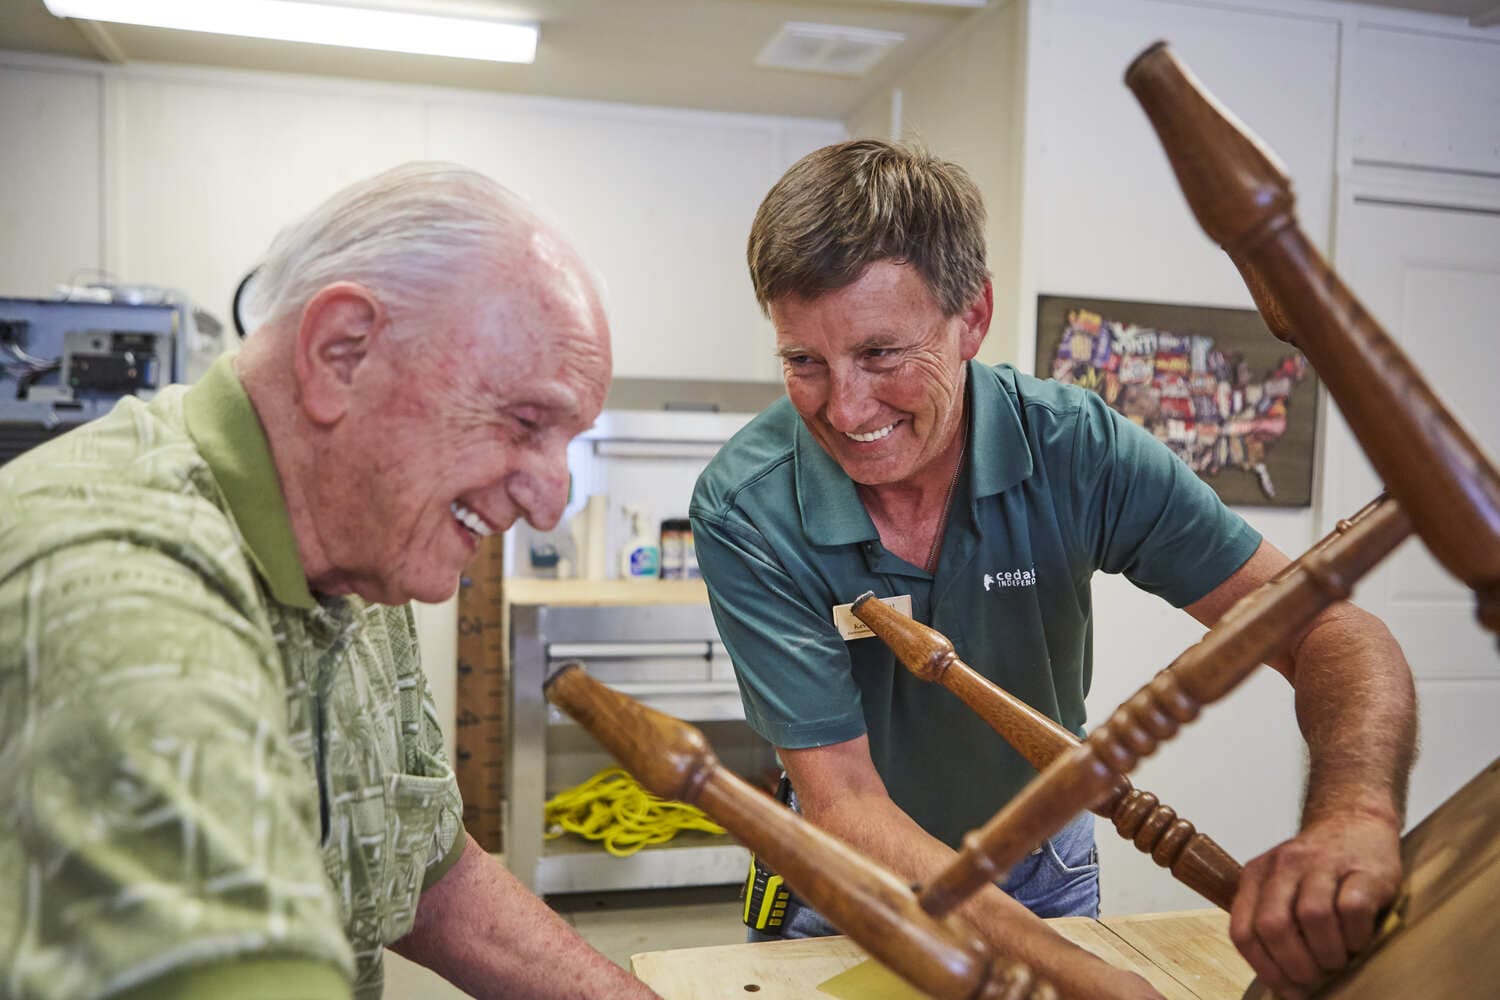 A team member and senior resident in a woodworking class